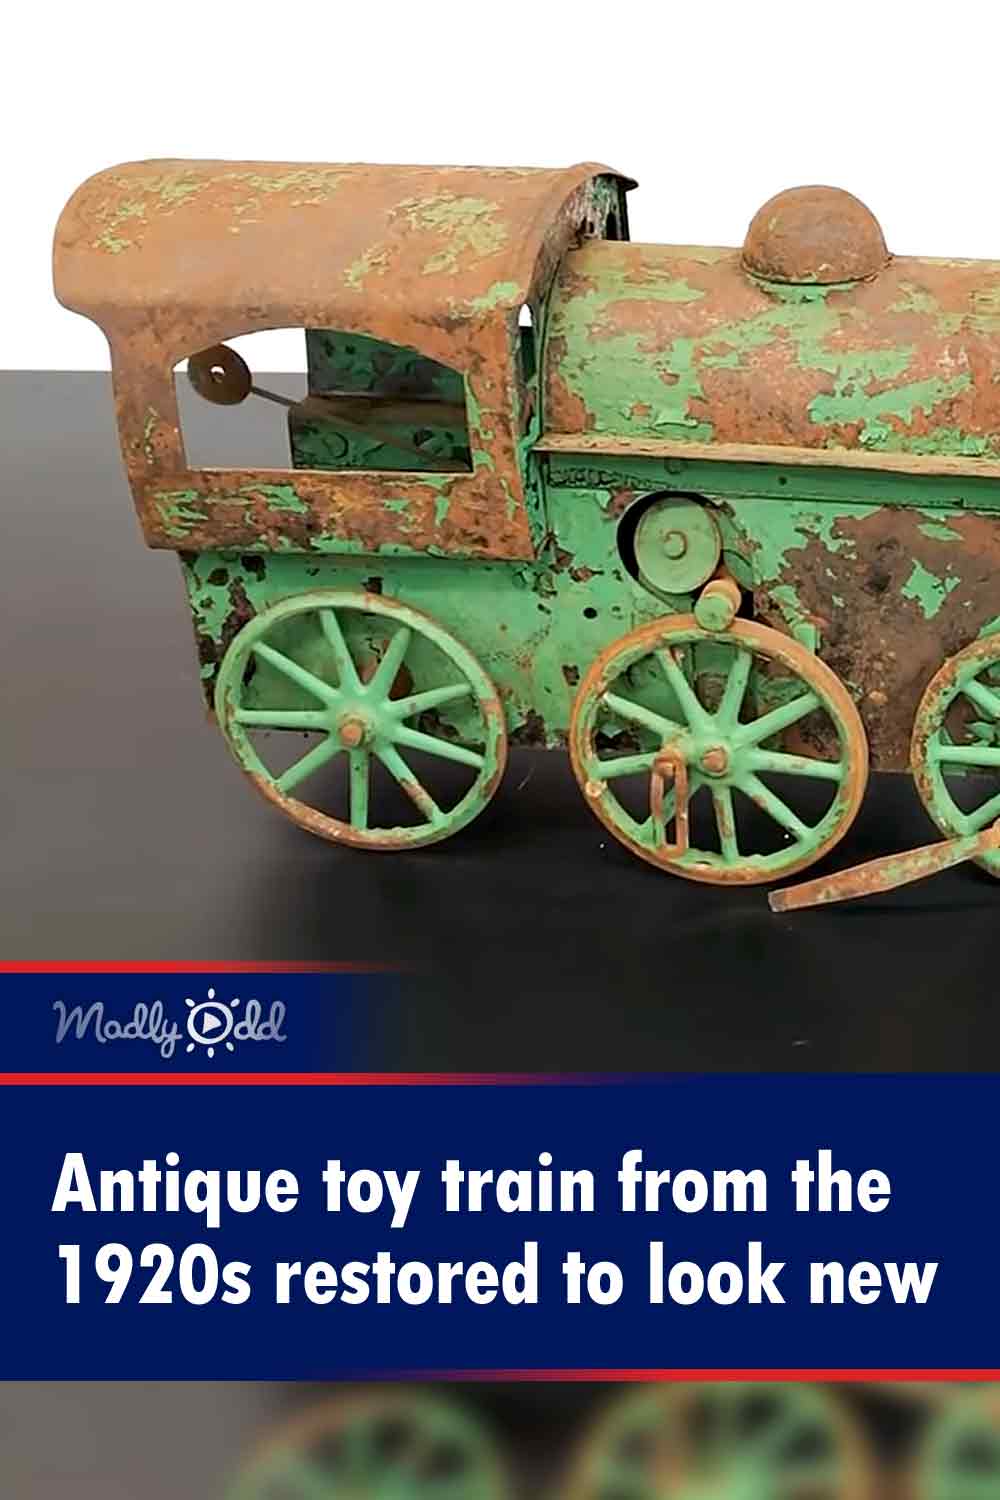 Antique toy train from the 1920s restored to look new